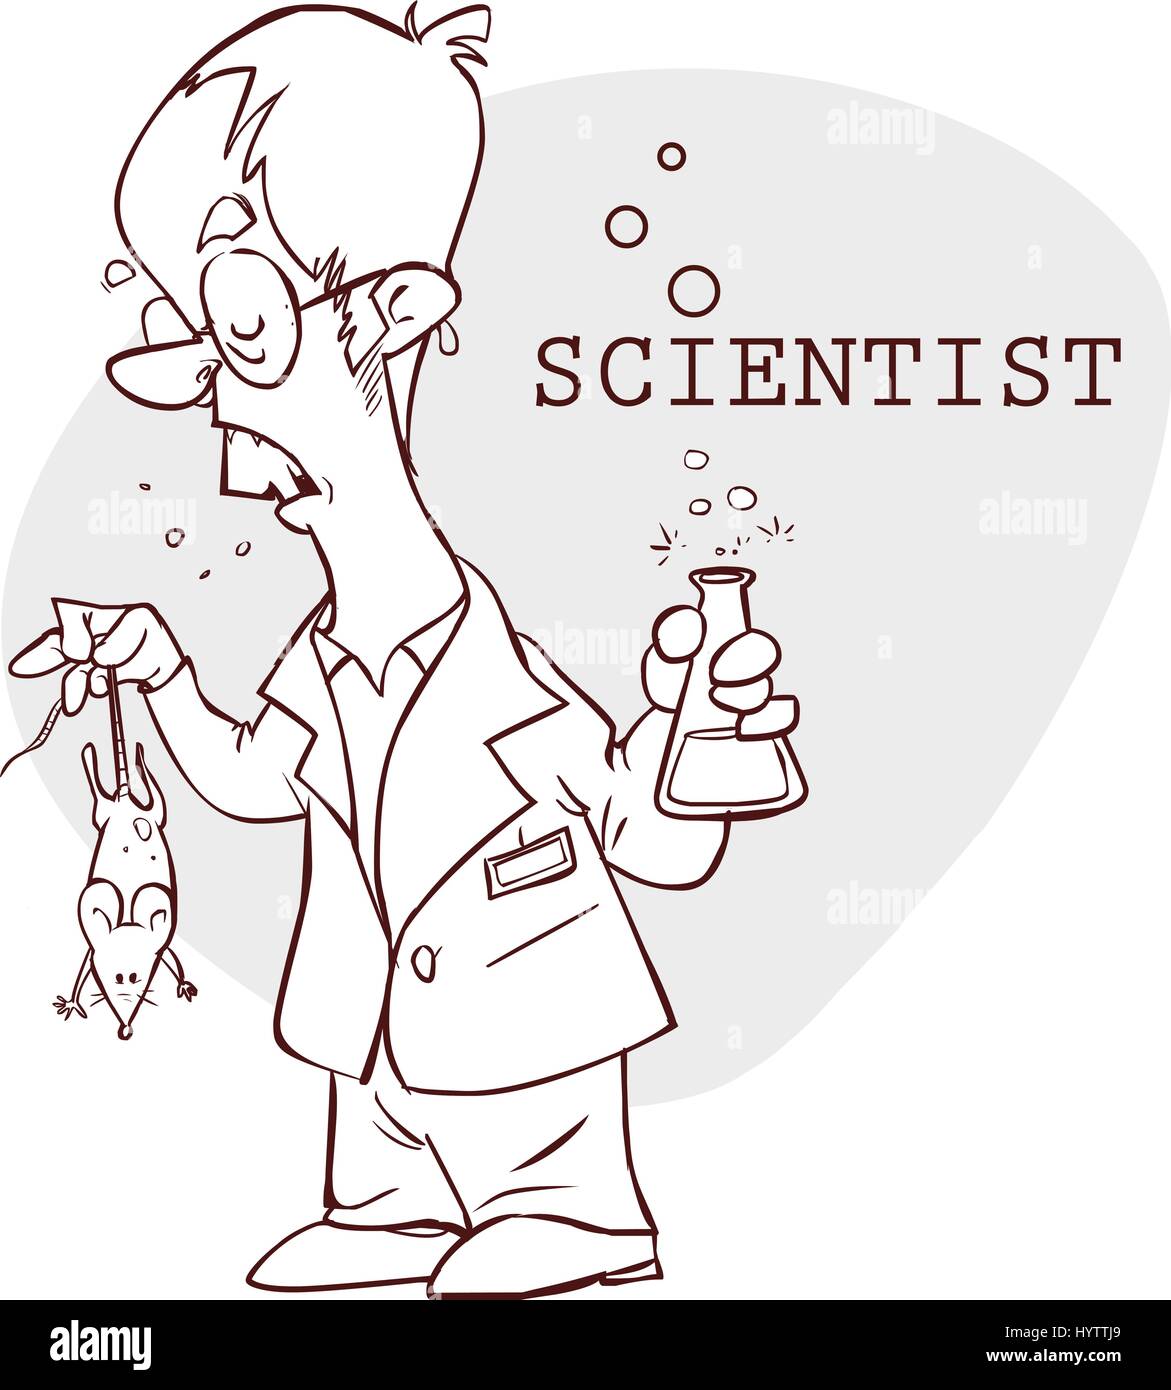 Male chemist vector Stock Vector Images - Alamy